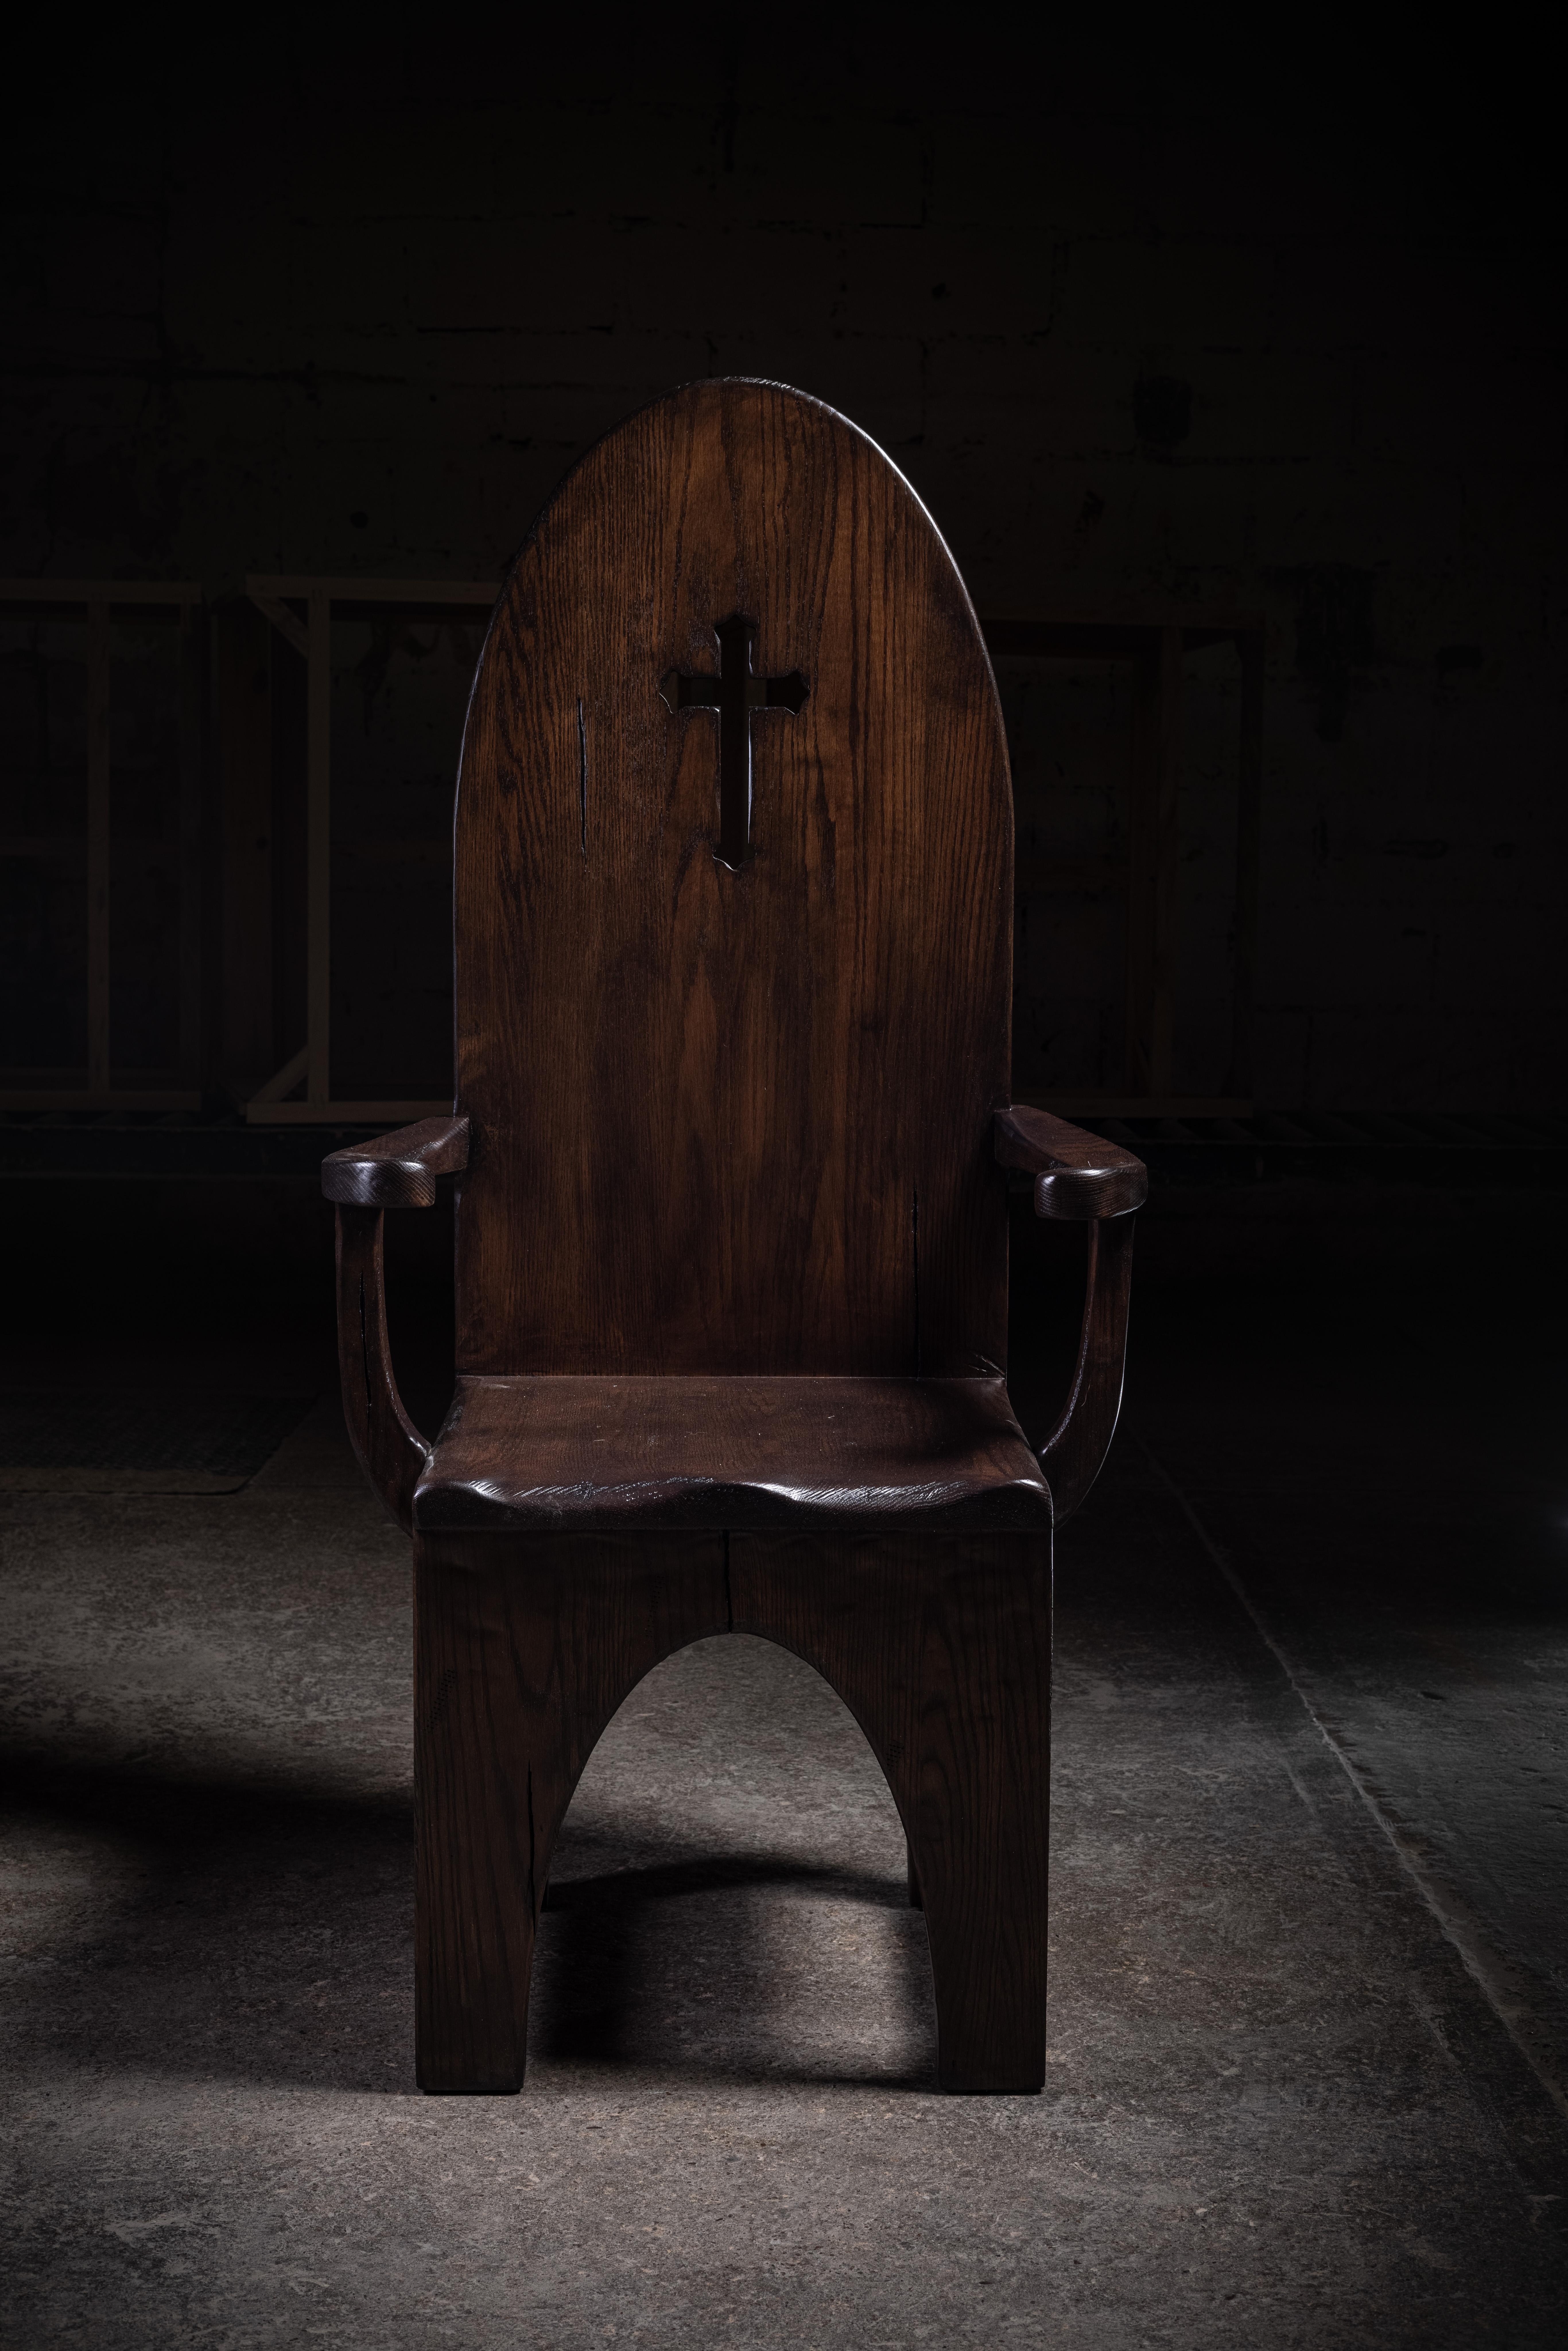 Homage to our favorite chairs.
20th century hand carved oak medieval Gothic style arched back dining chair.